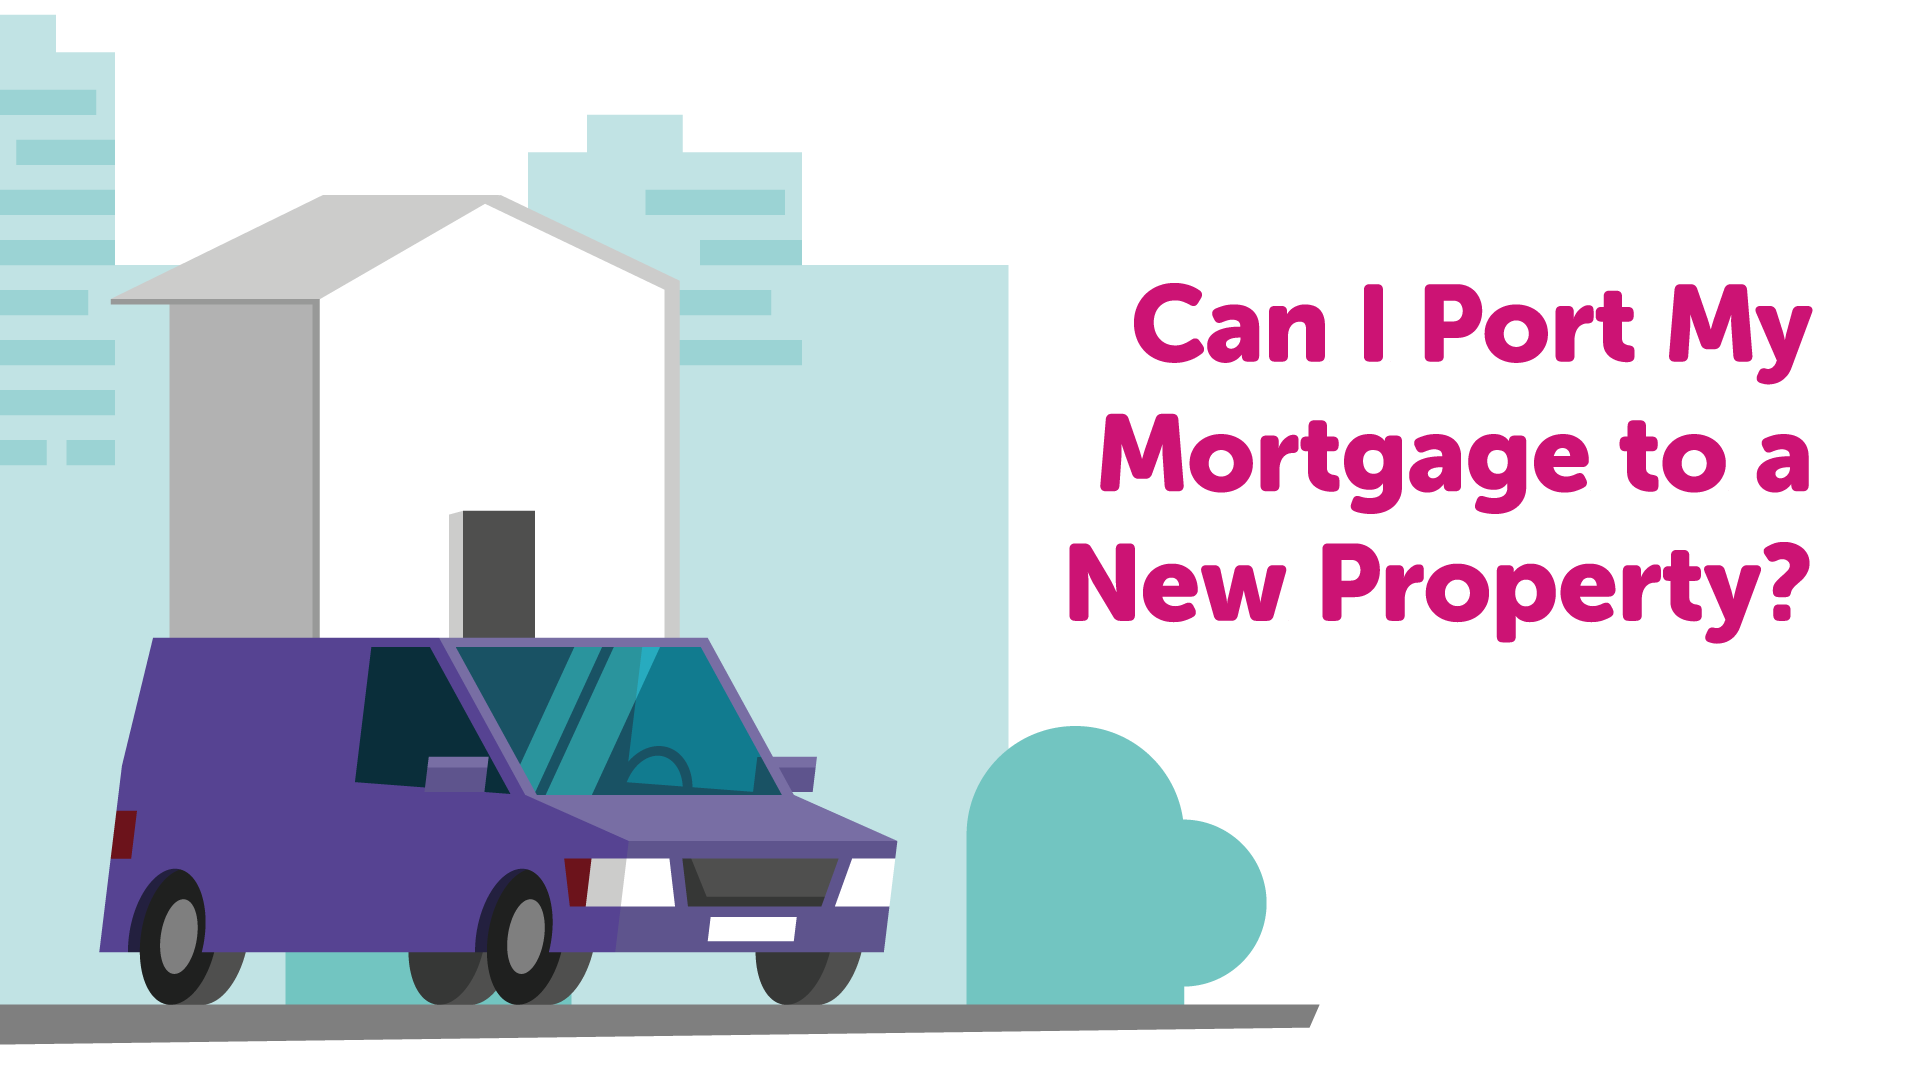 Can I port my mortgage to a new property?